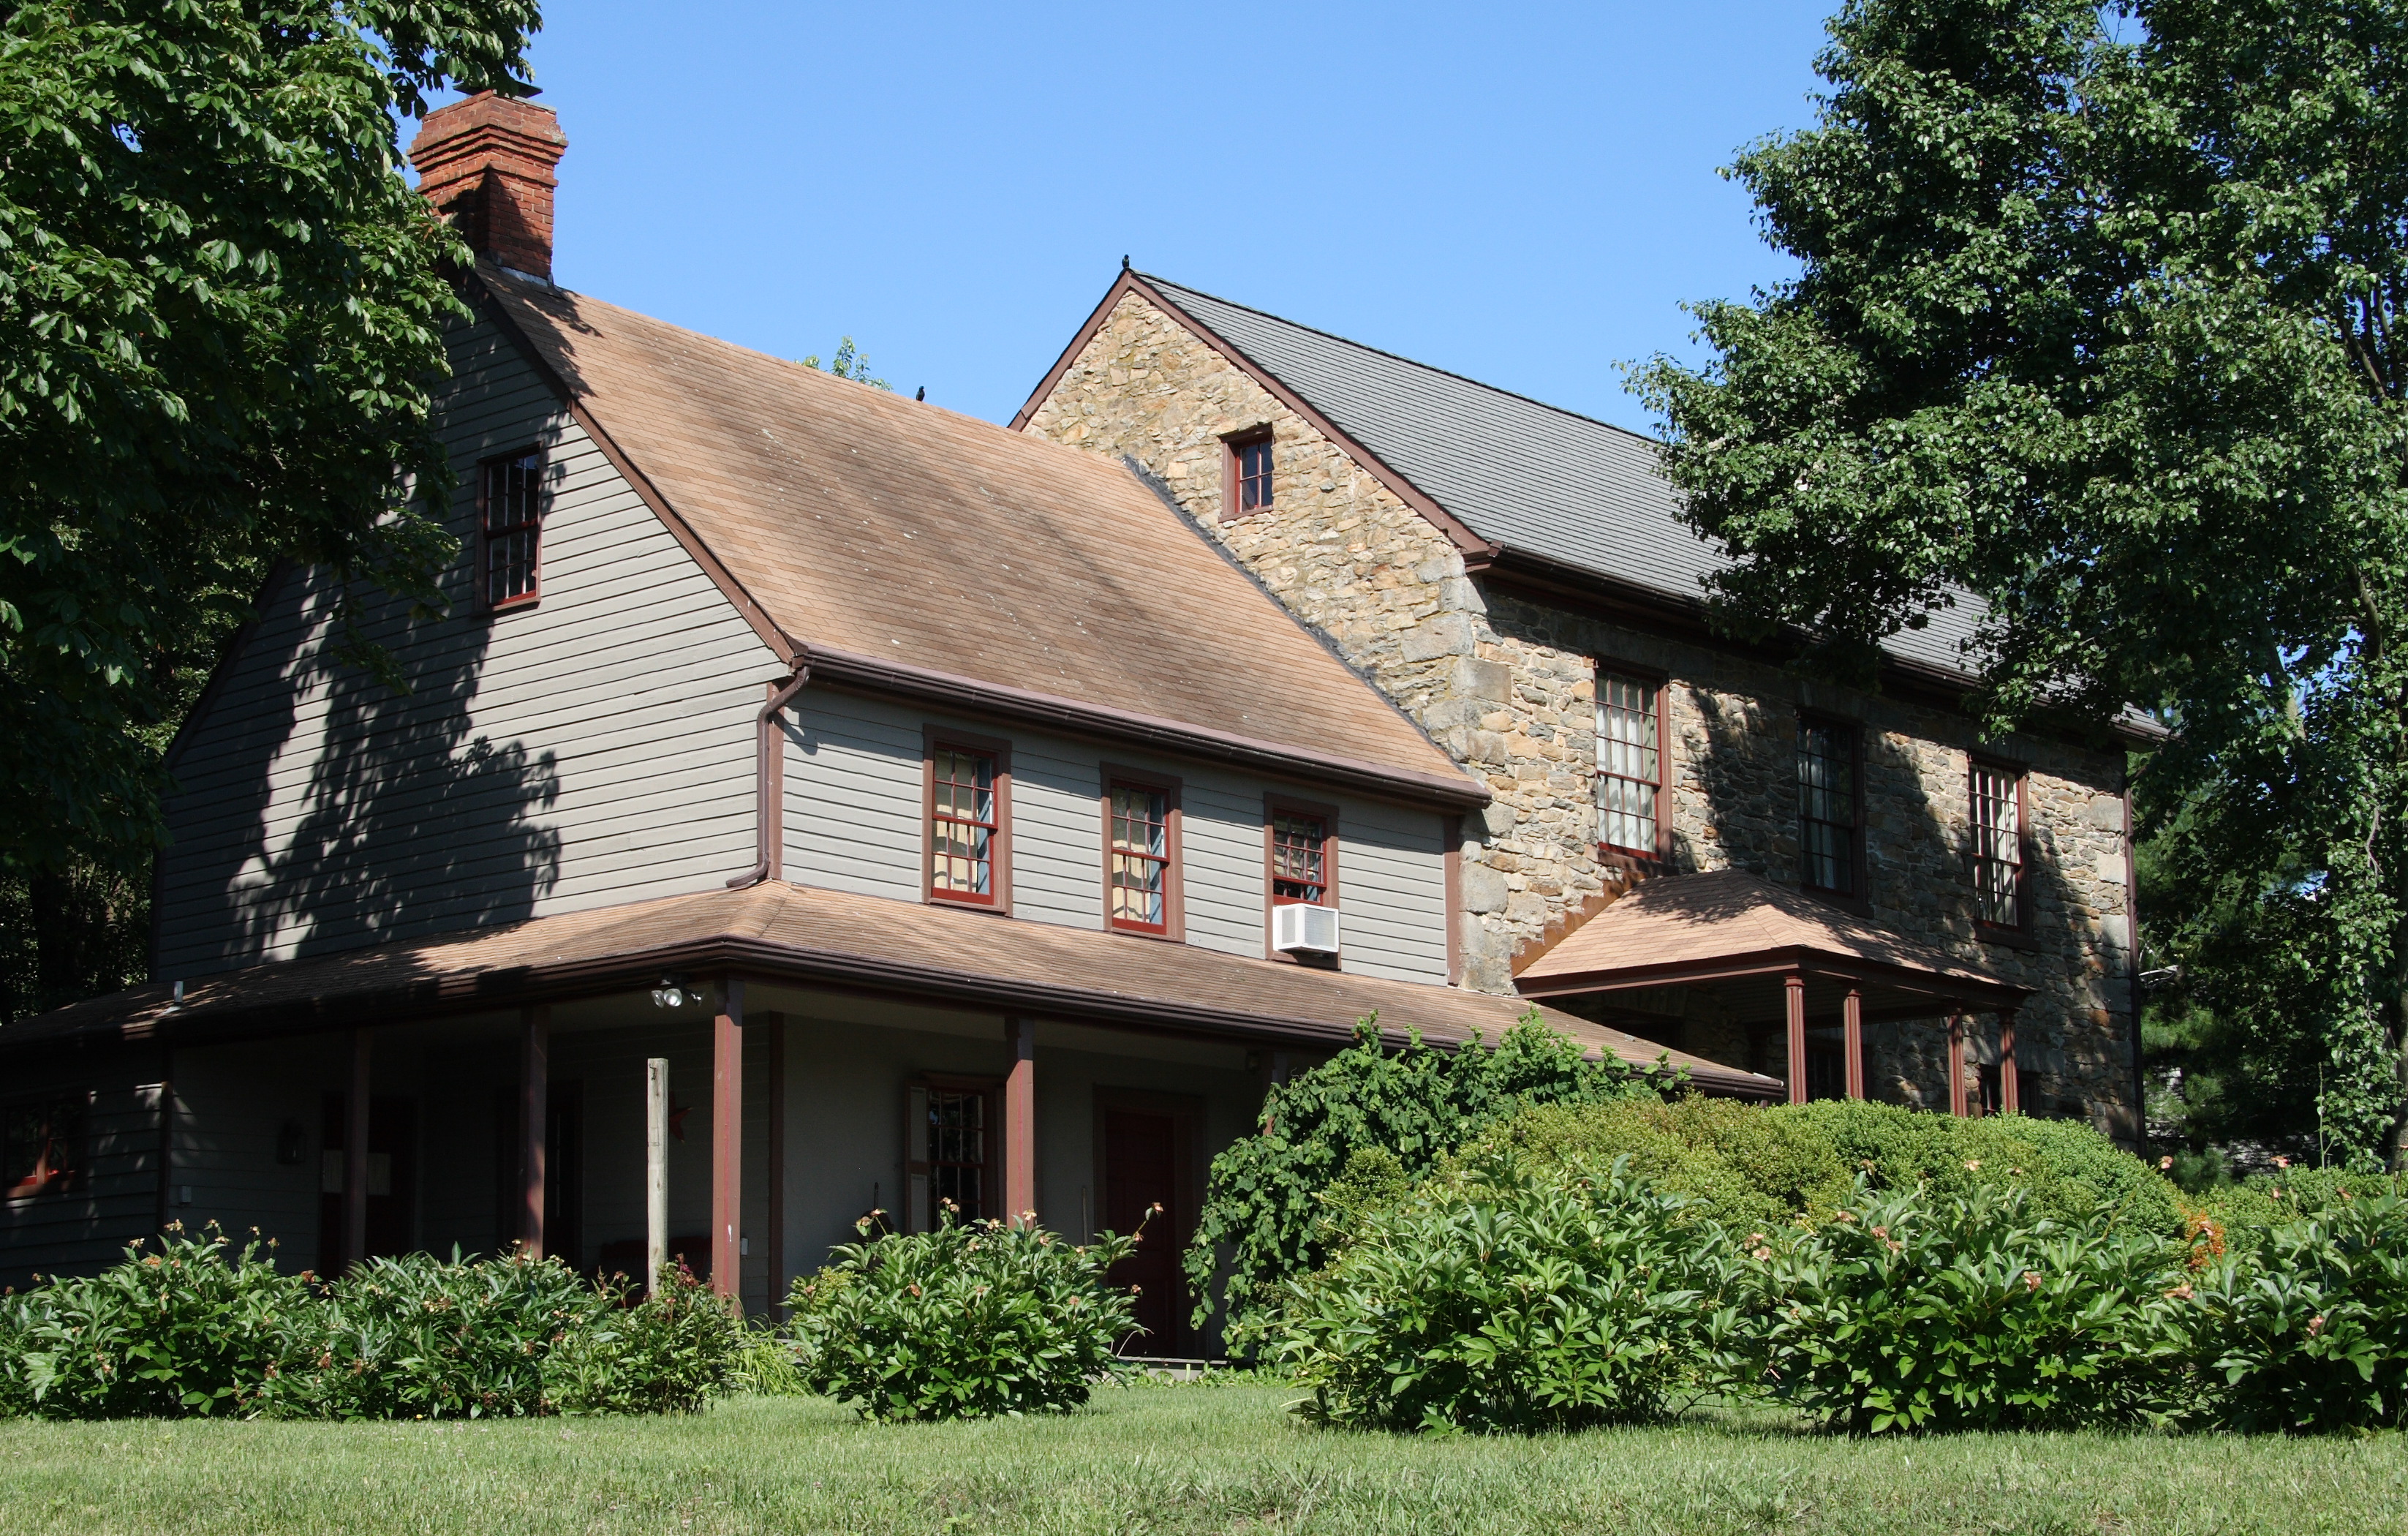 File:Moses Brown House.JPG - Wikimedia Commons